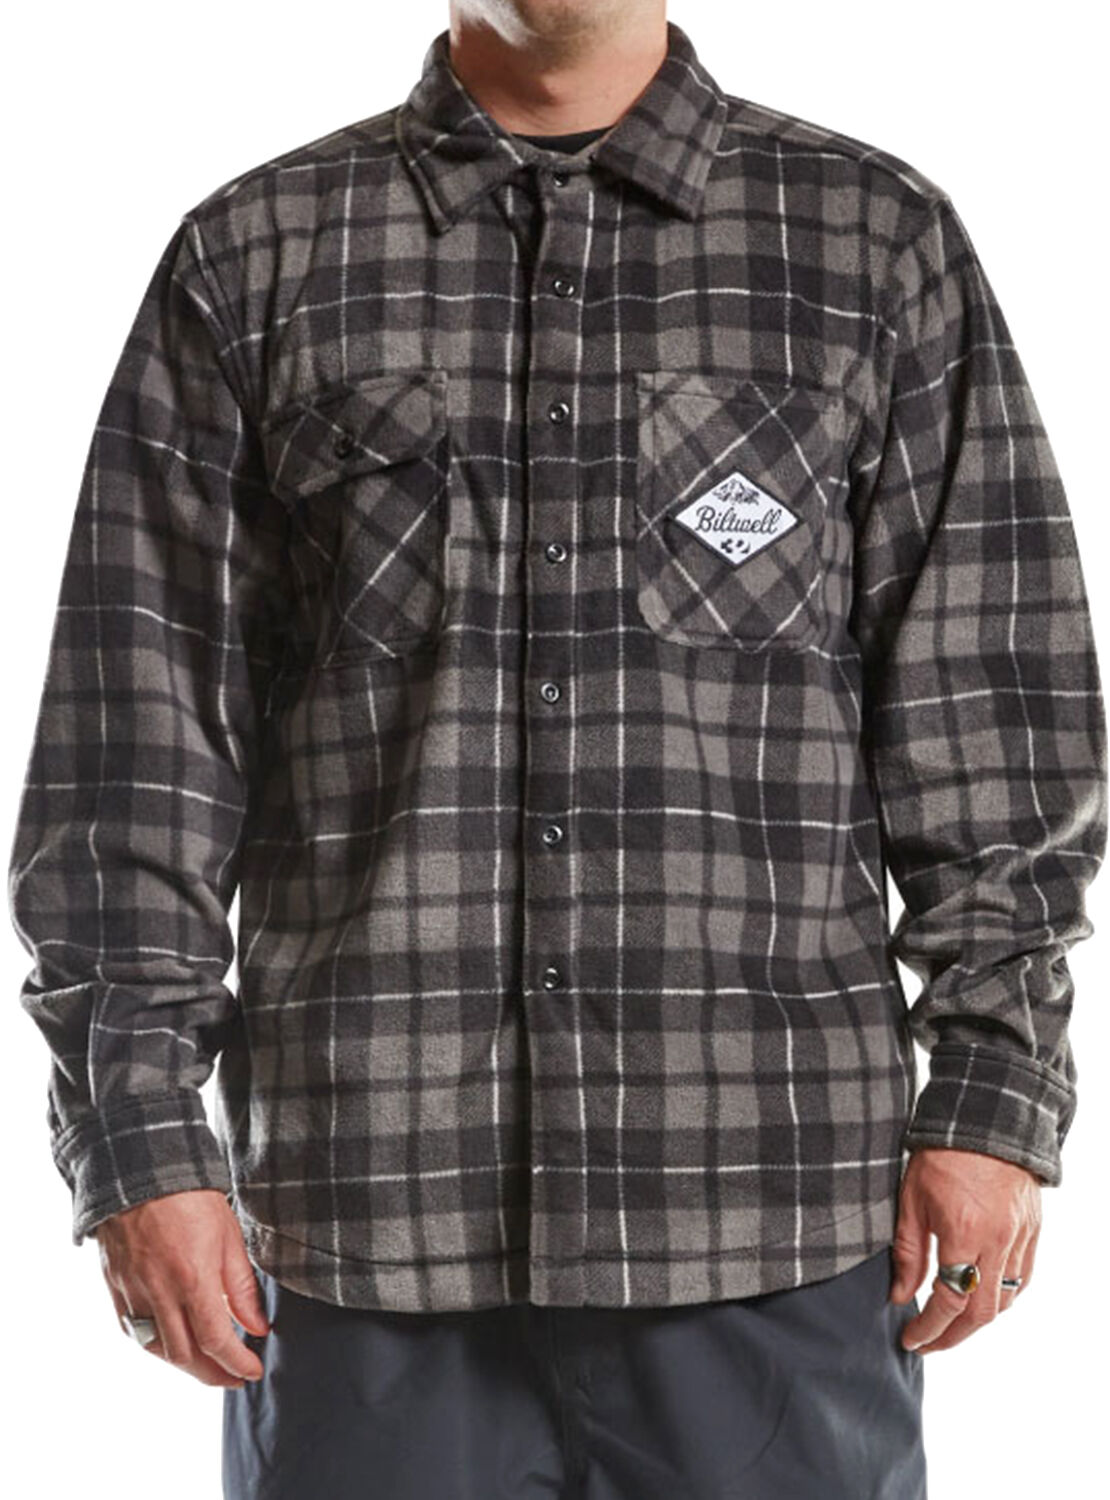 THIRTYTWO REST STOP SHIRT CHARCOAL S